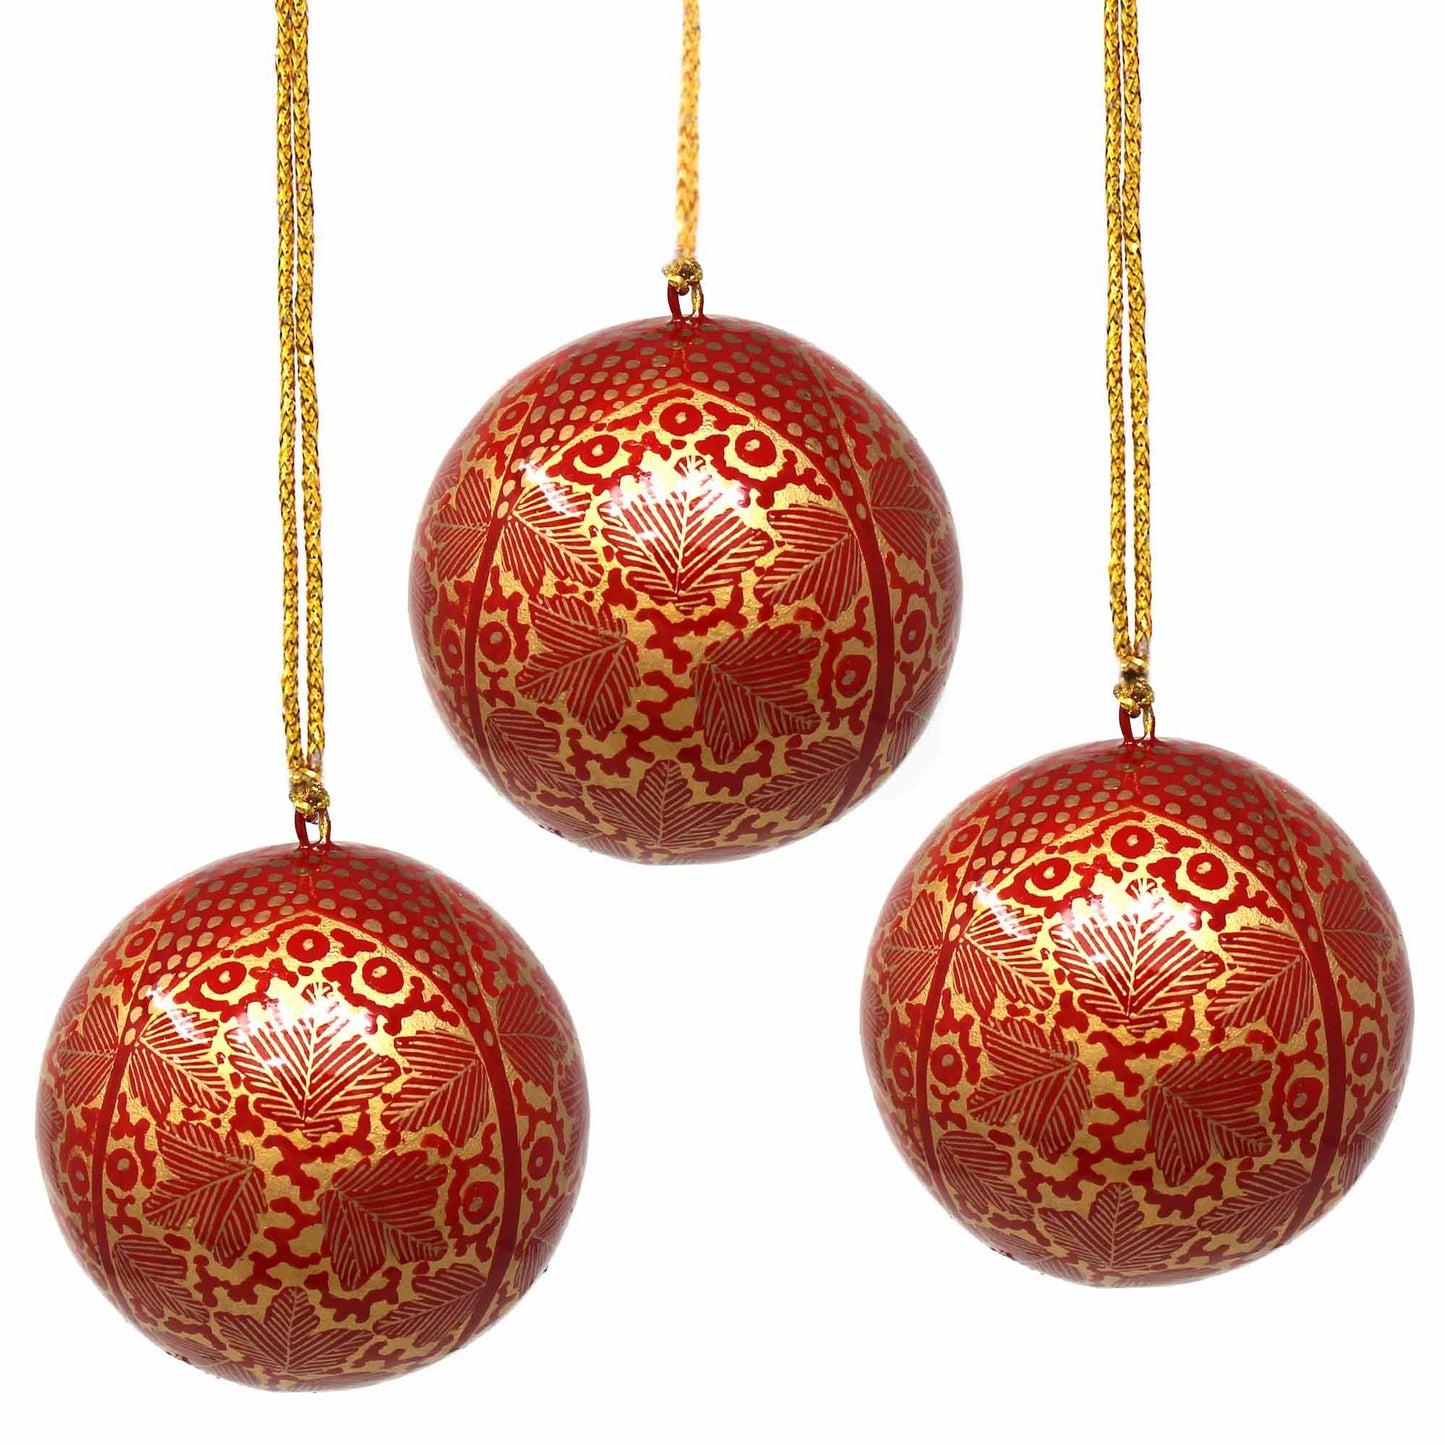 handpainted-ornaments-gold-chinar-leaves-pack-of-3